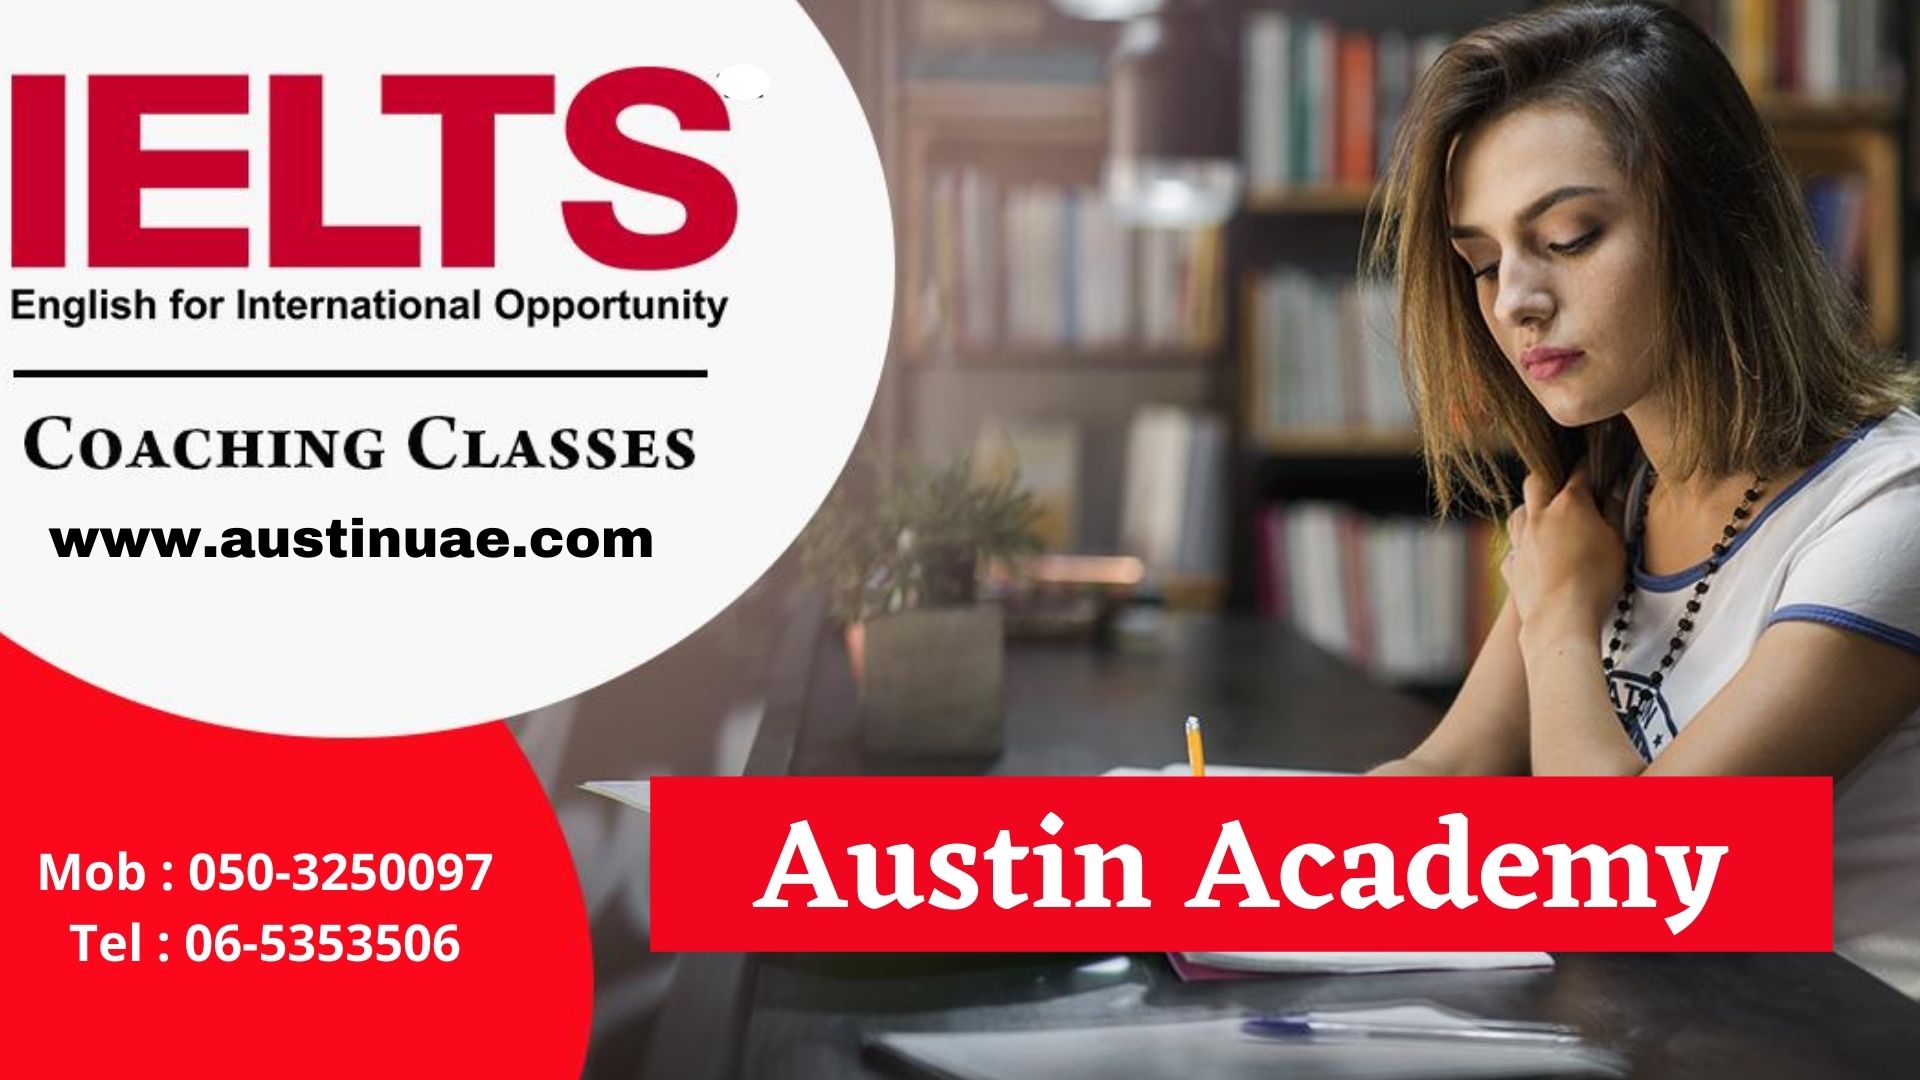 Ielts Classes In Sharjah With Best Offer Call 058 819715